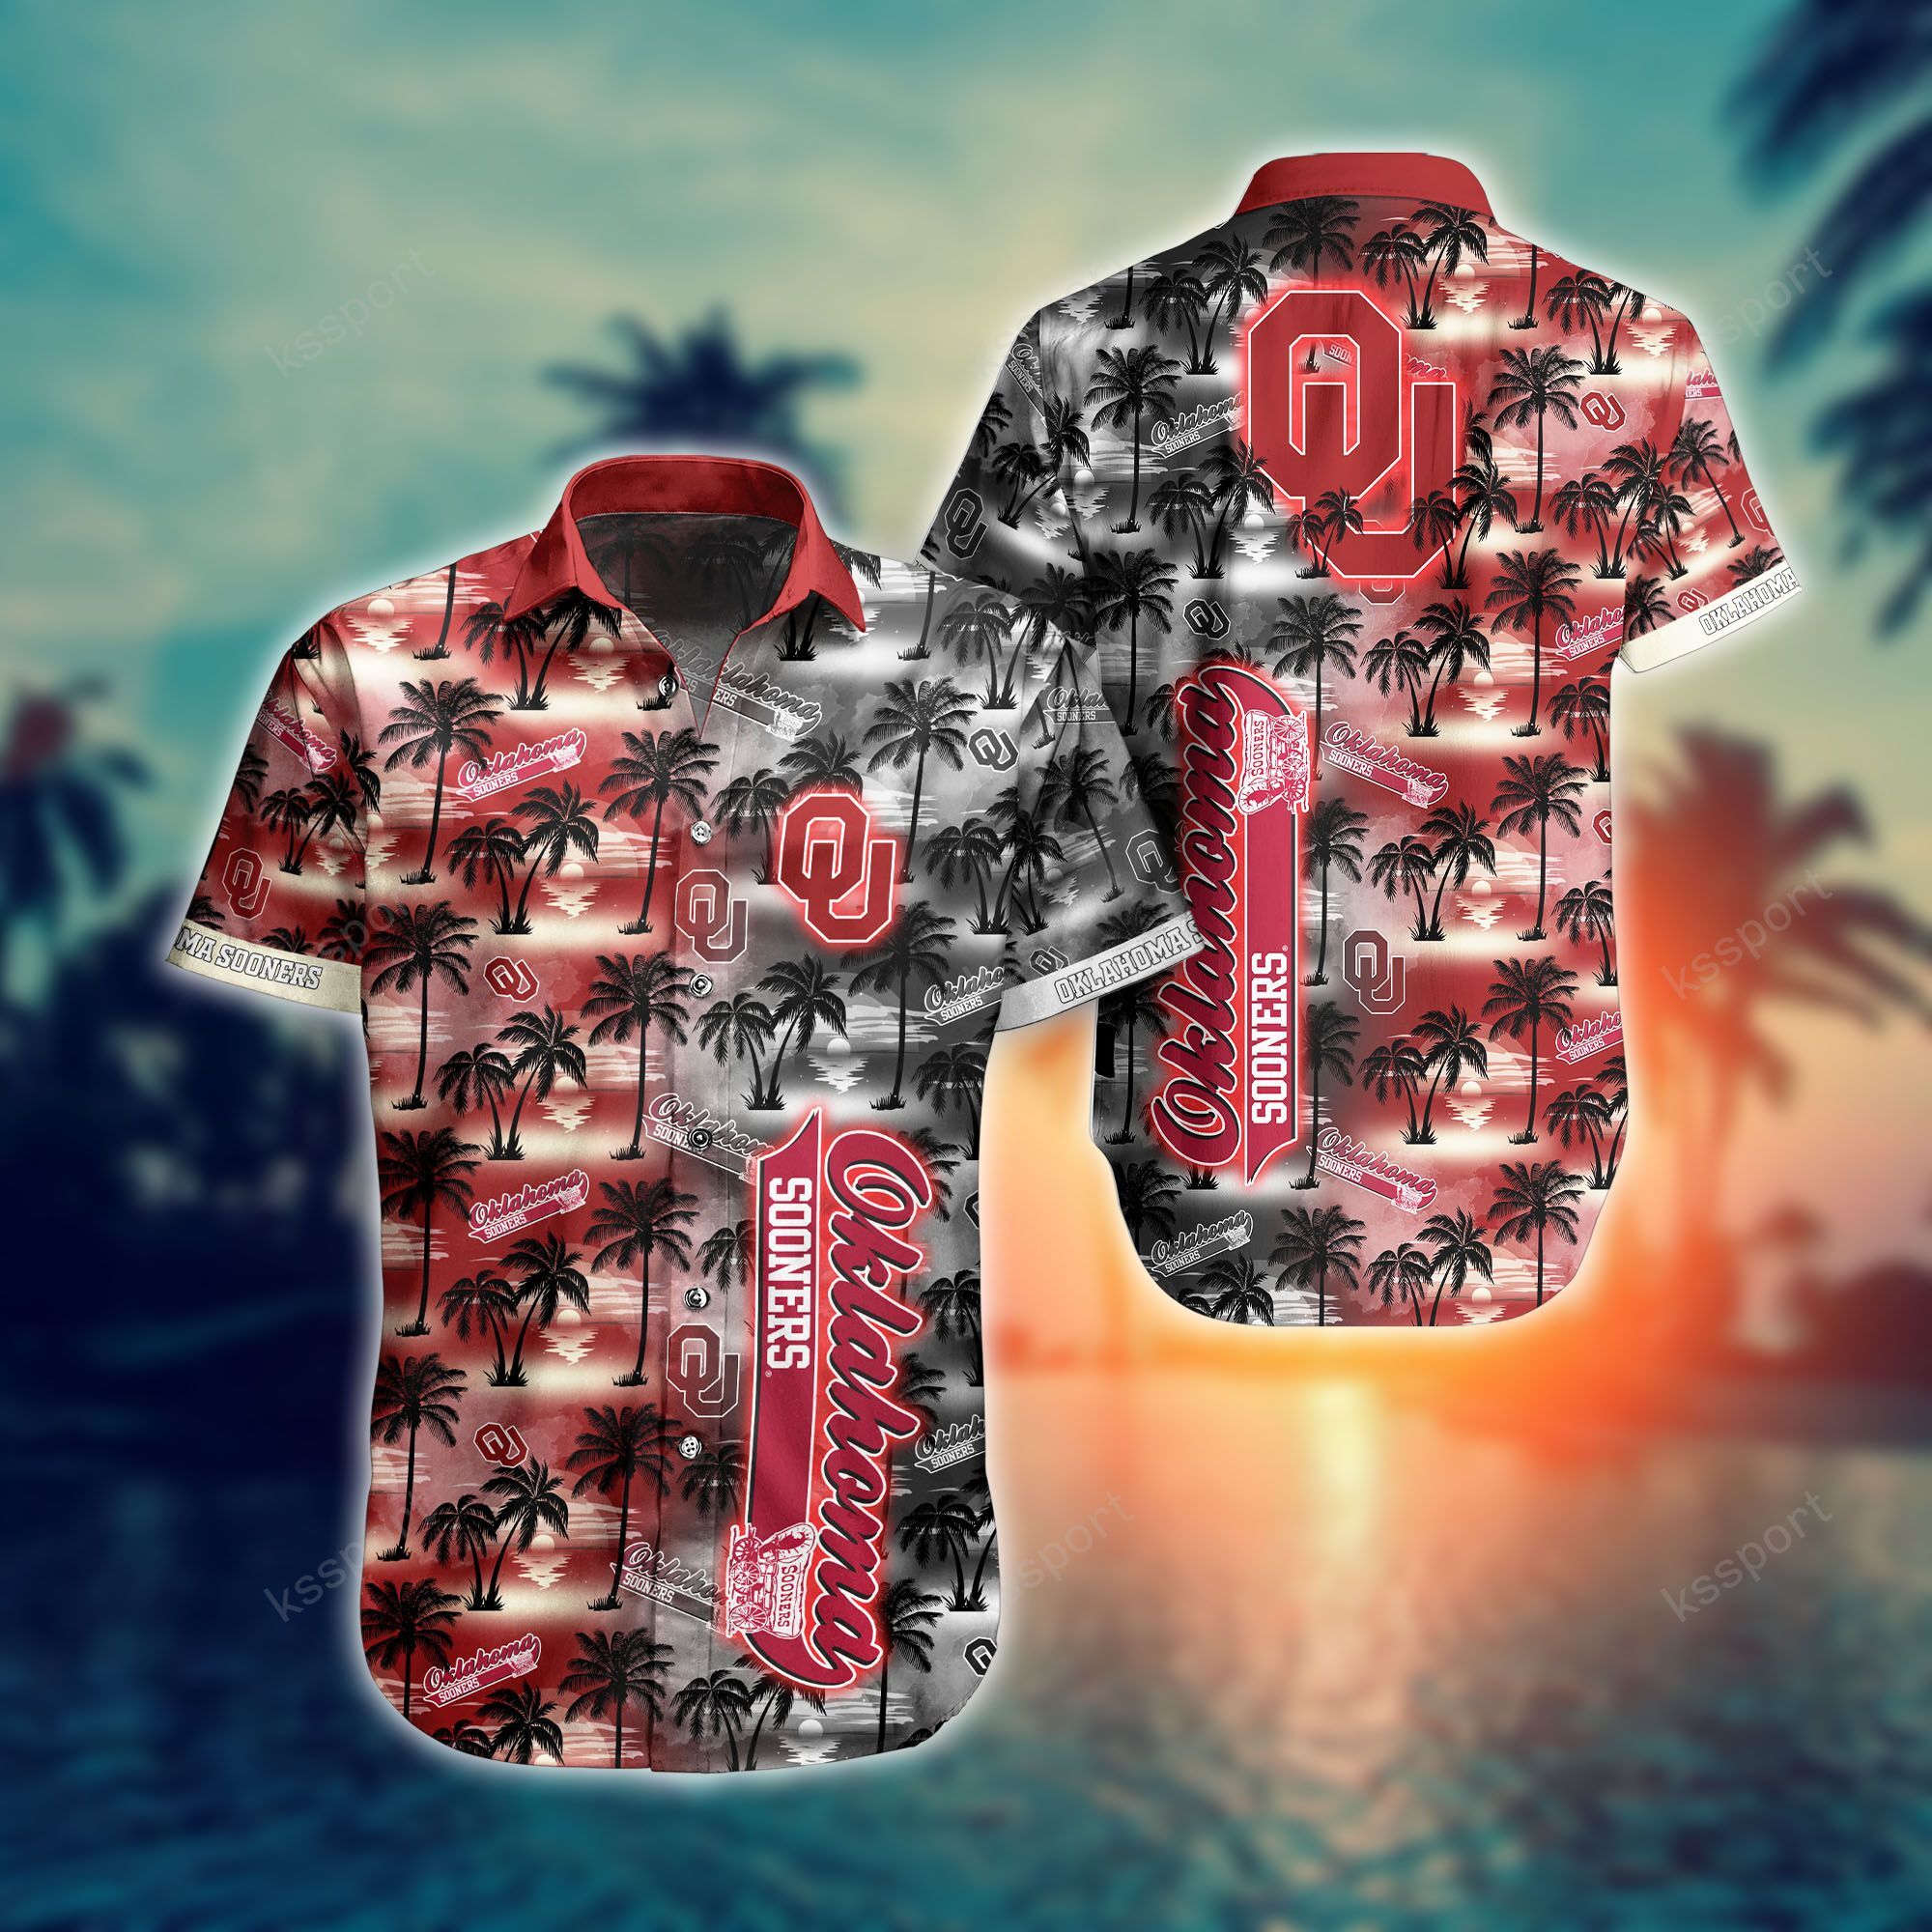 Treat yourself to a cool Hawaiian set today! 48